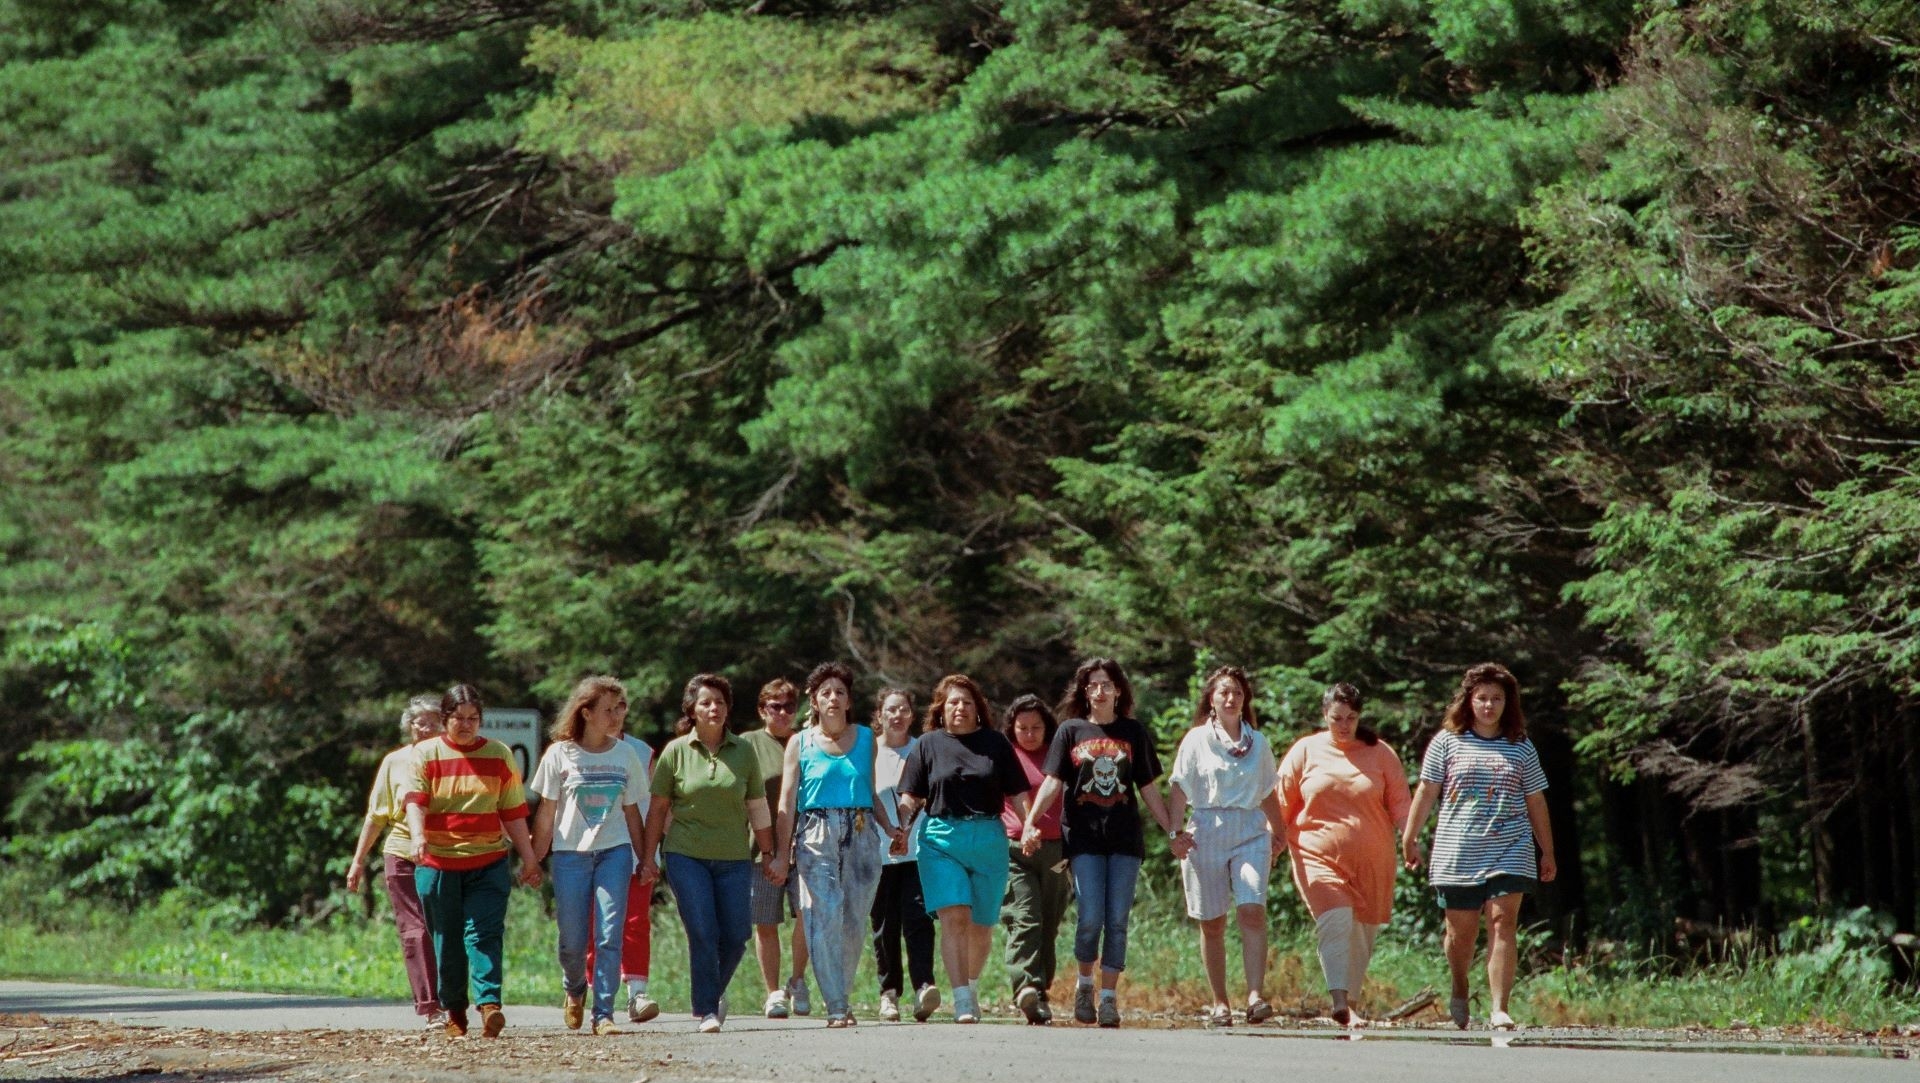 A group of women walking together on a road surrounded by trees.